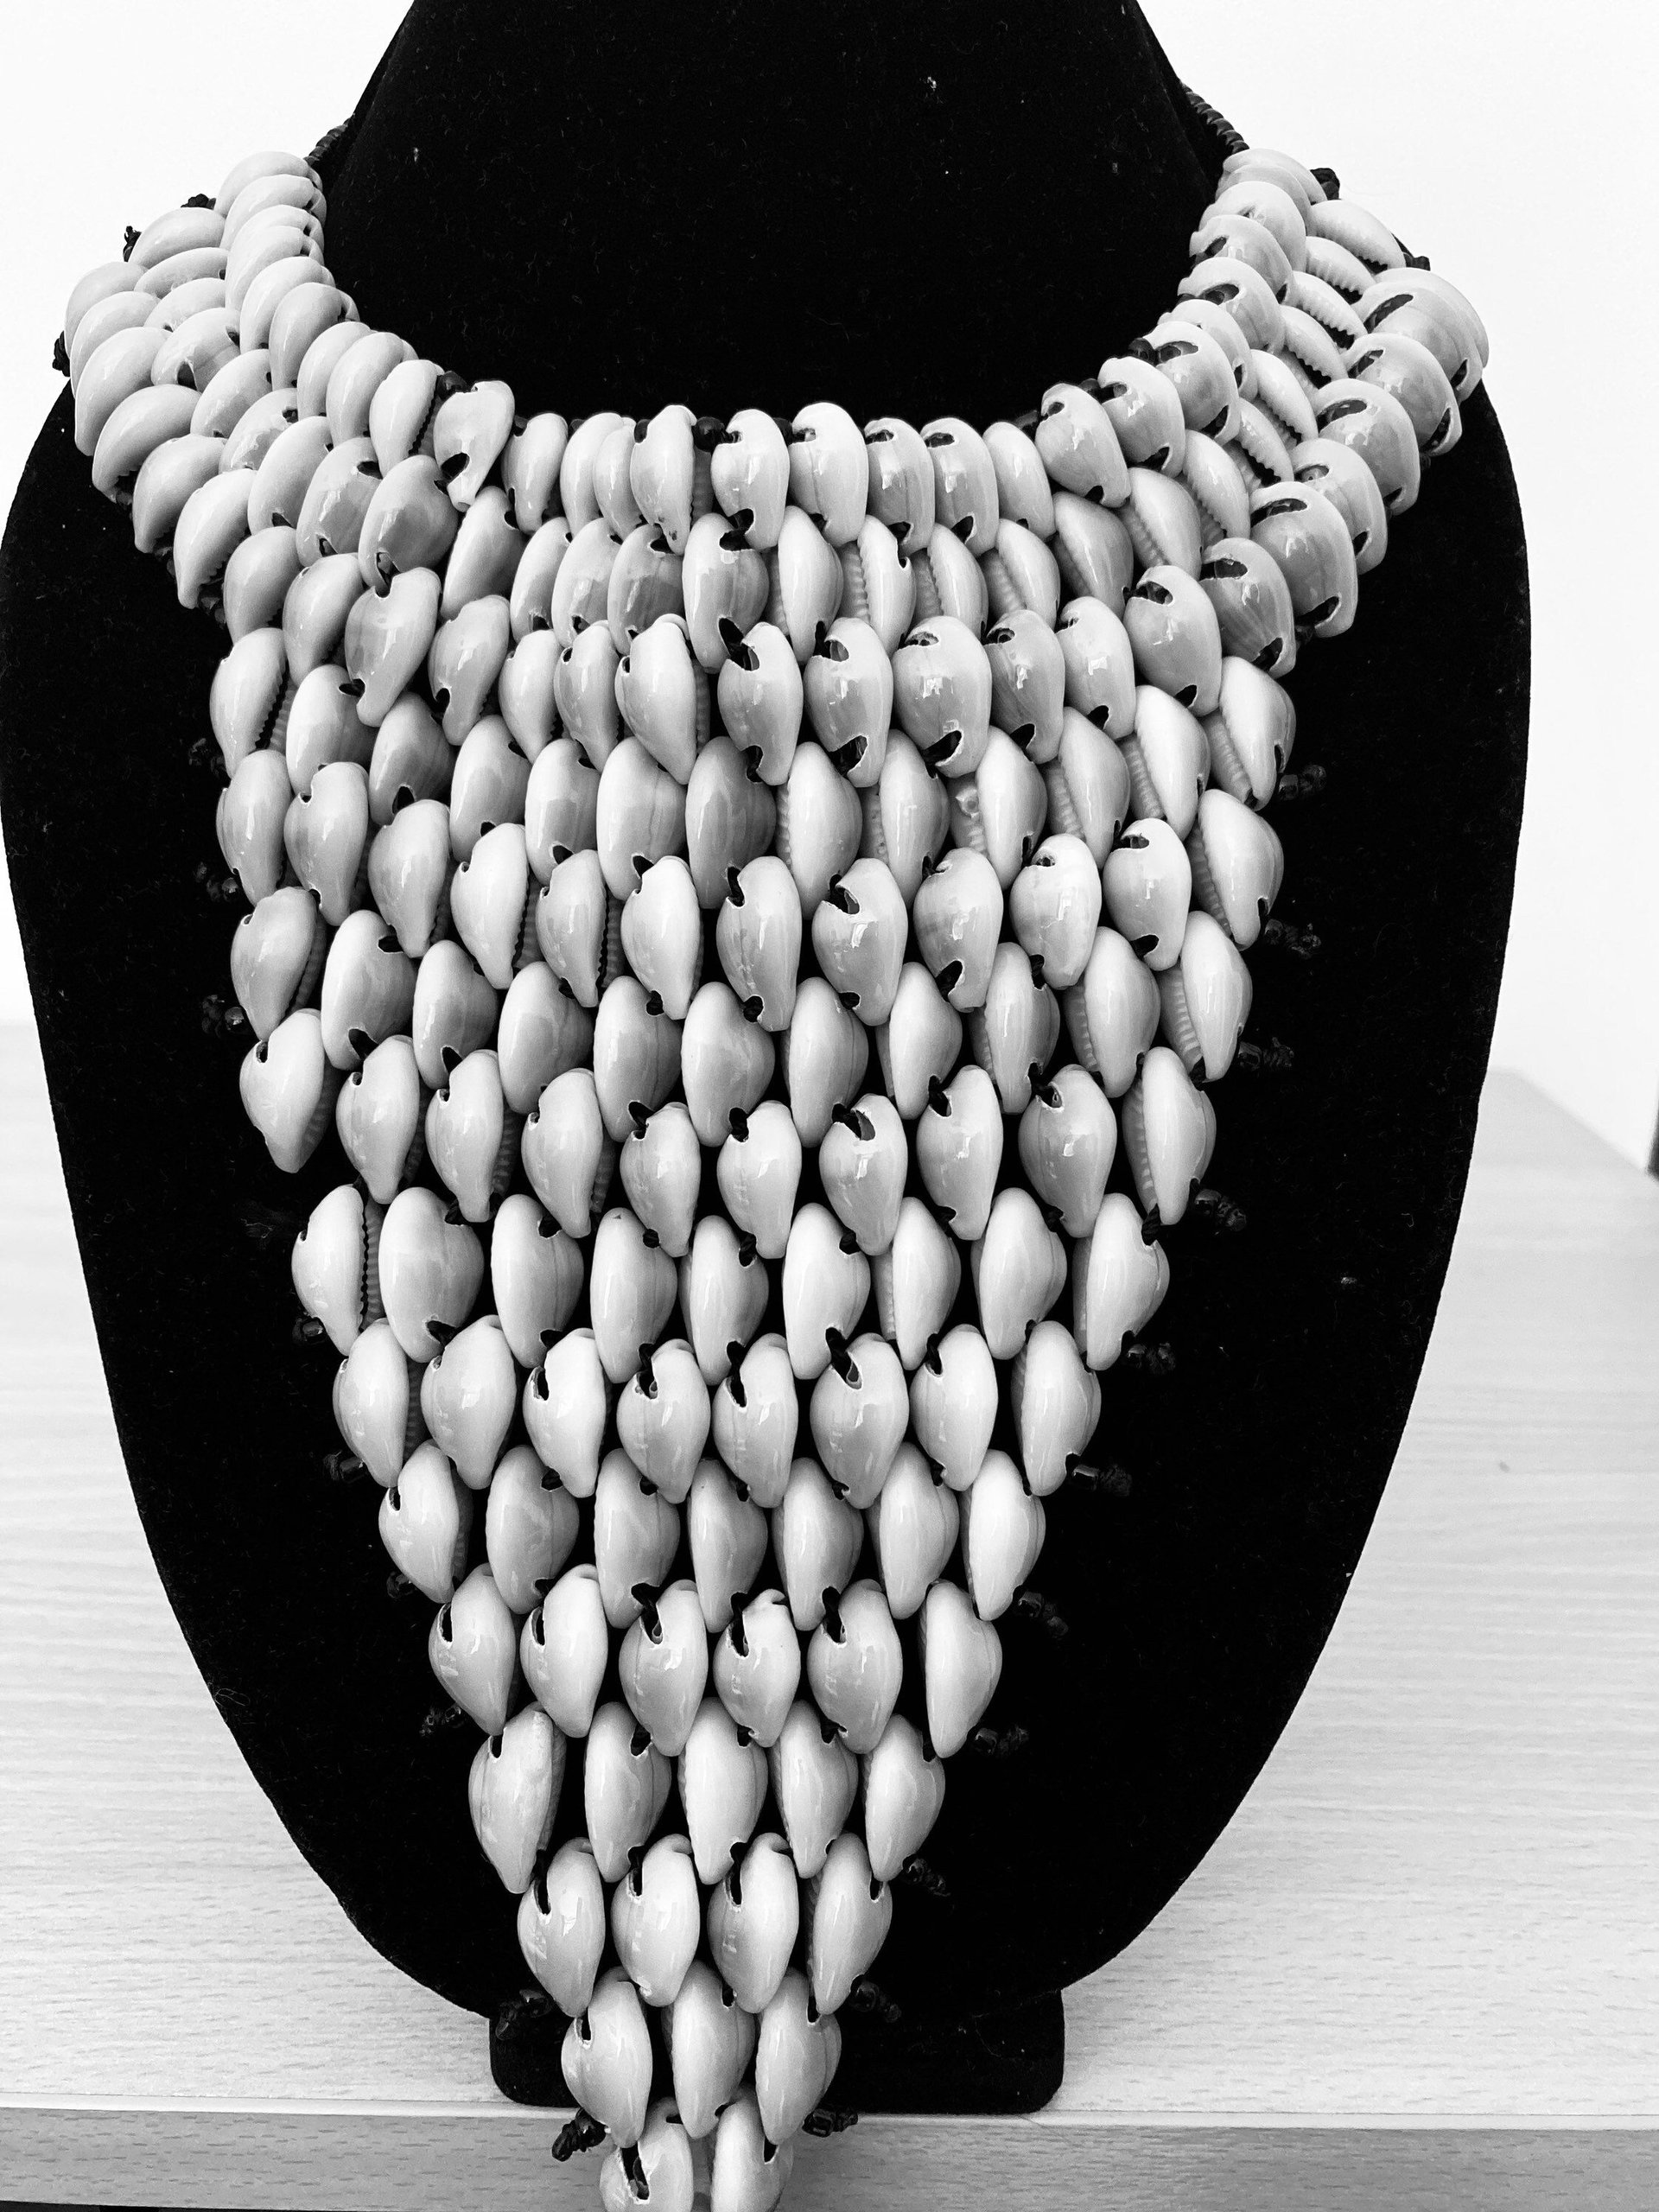 African Maasai Handmade Necklace with Cowrie Shells | Bib Necklace